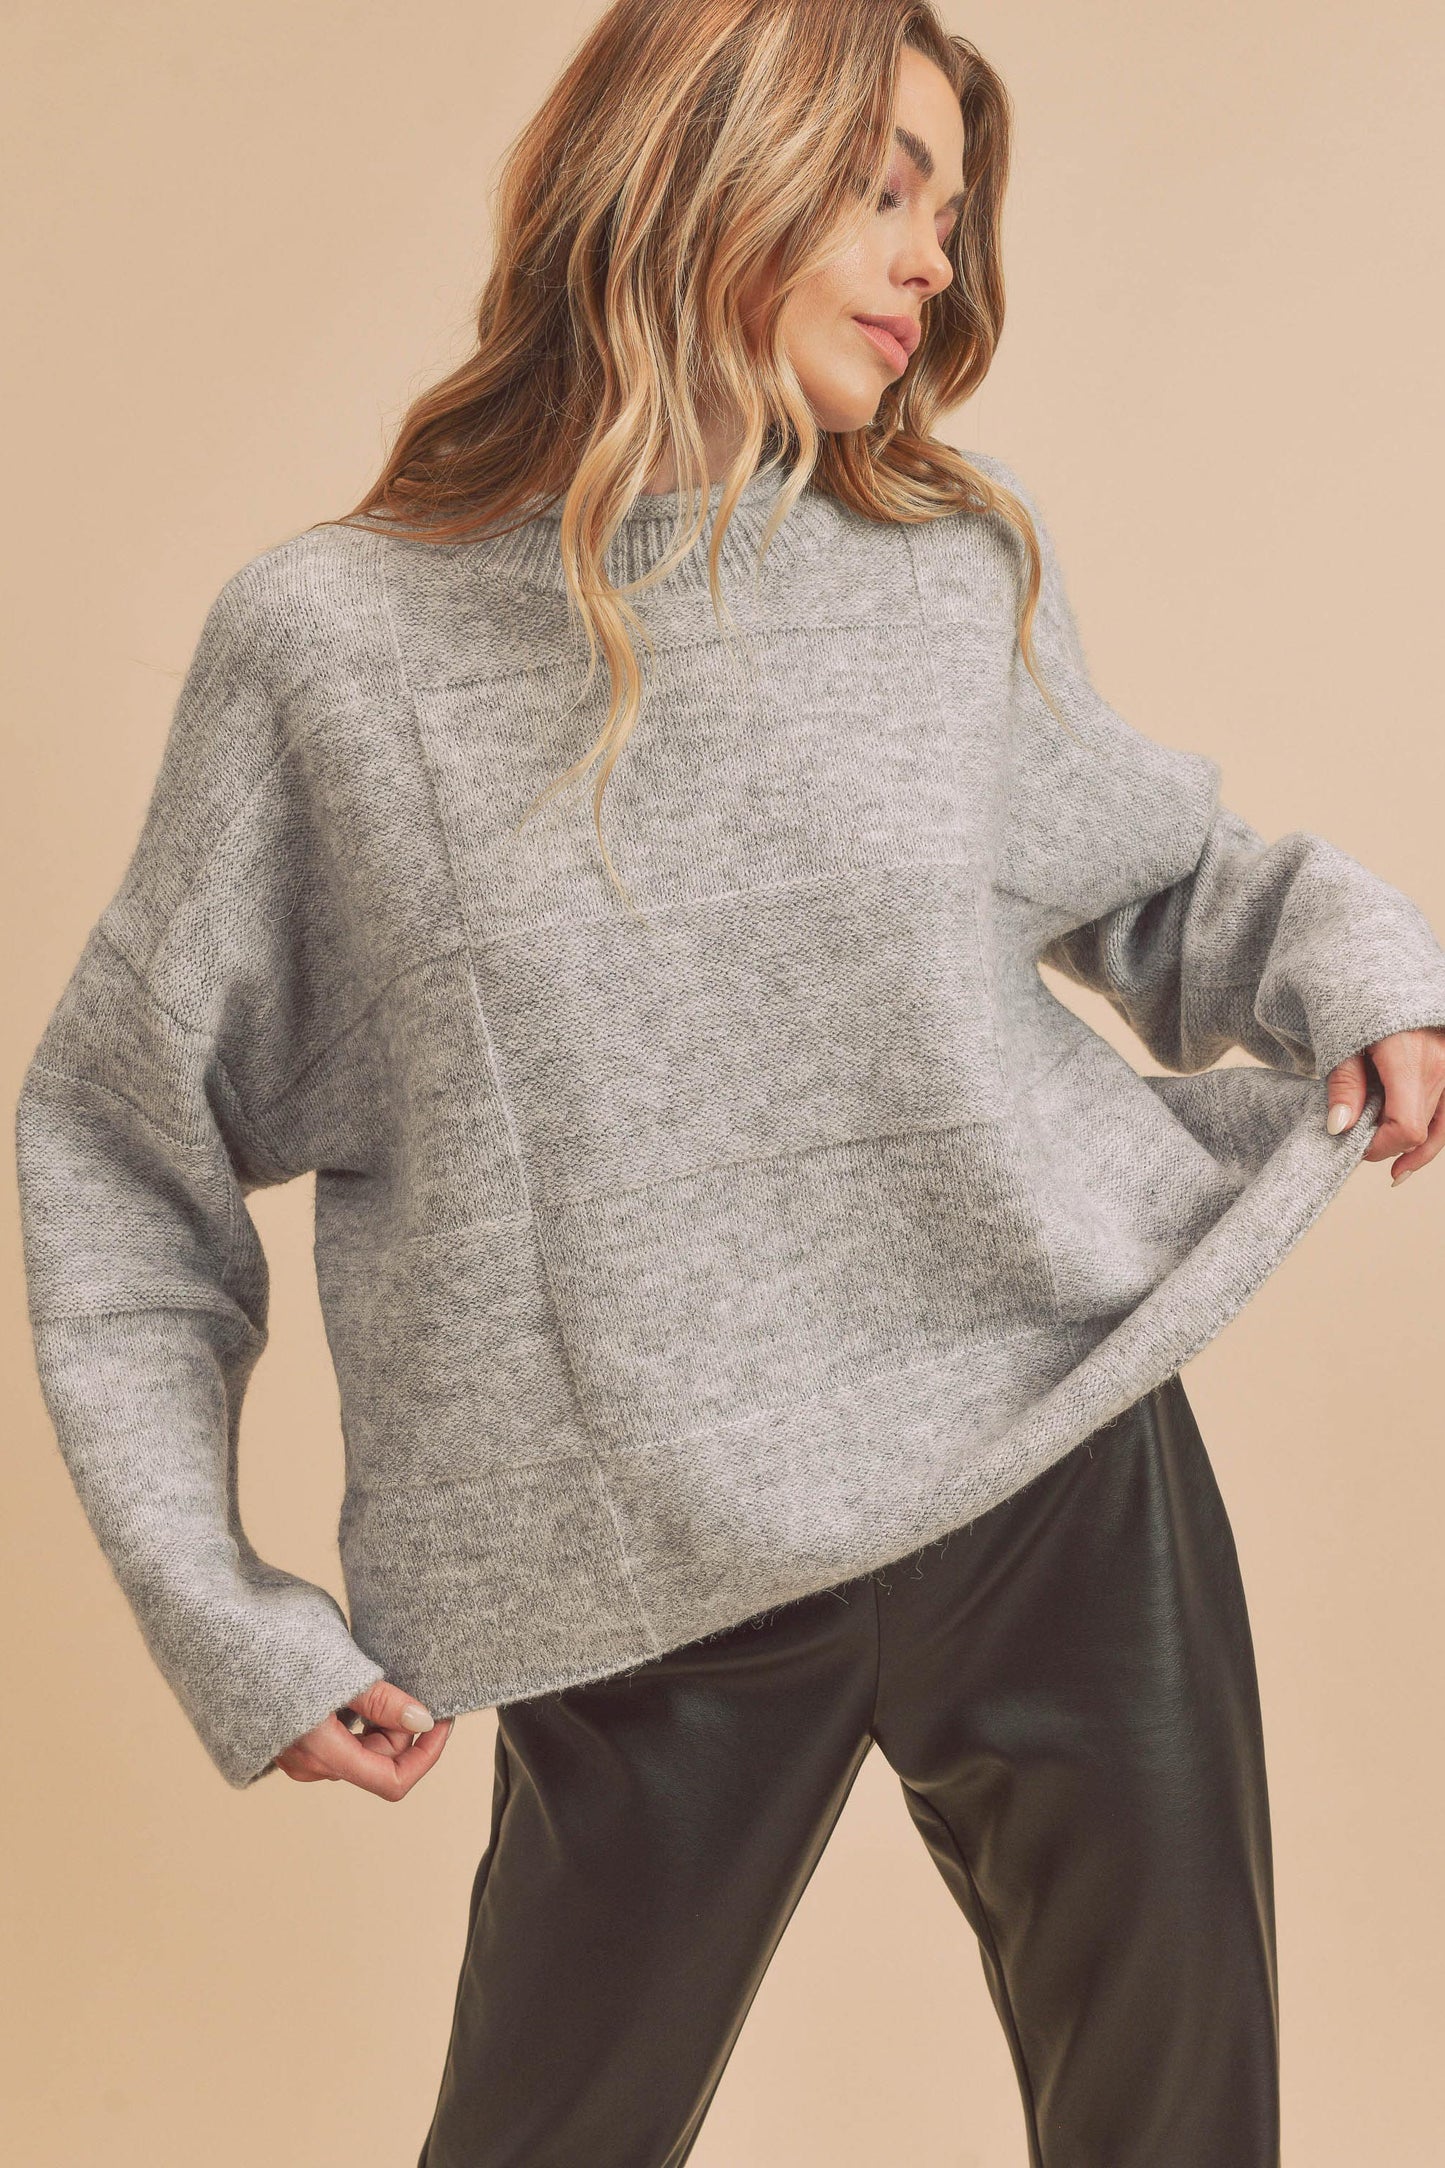 Patch Style Gray Sweater